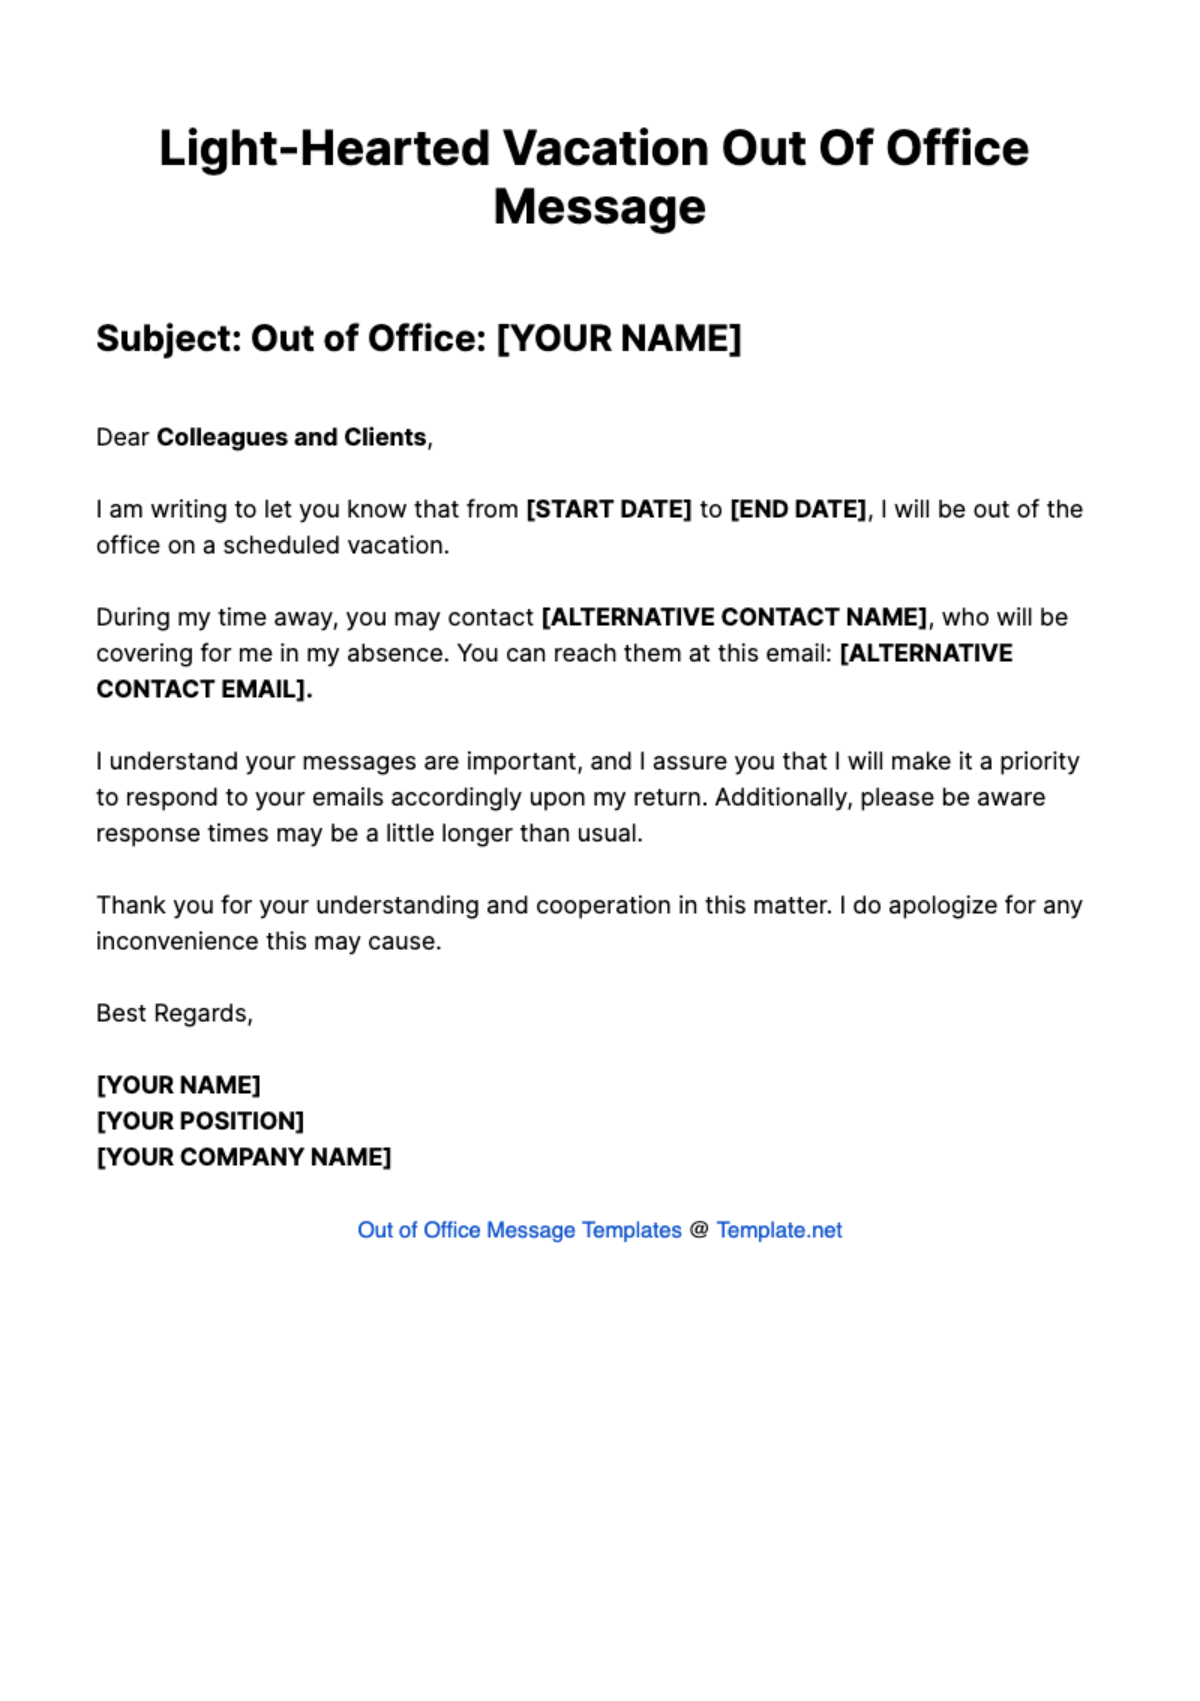 Light-Hearted Vacation Out Of Office Message Template